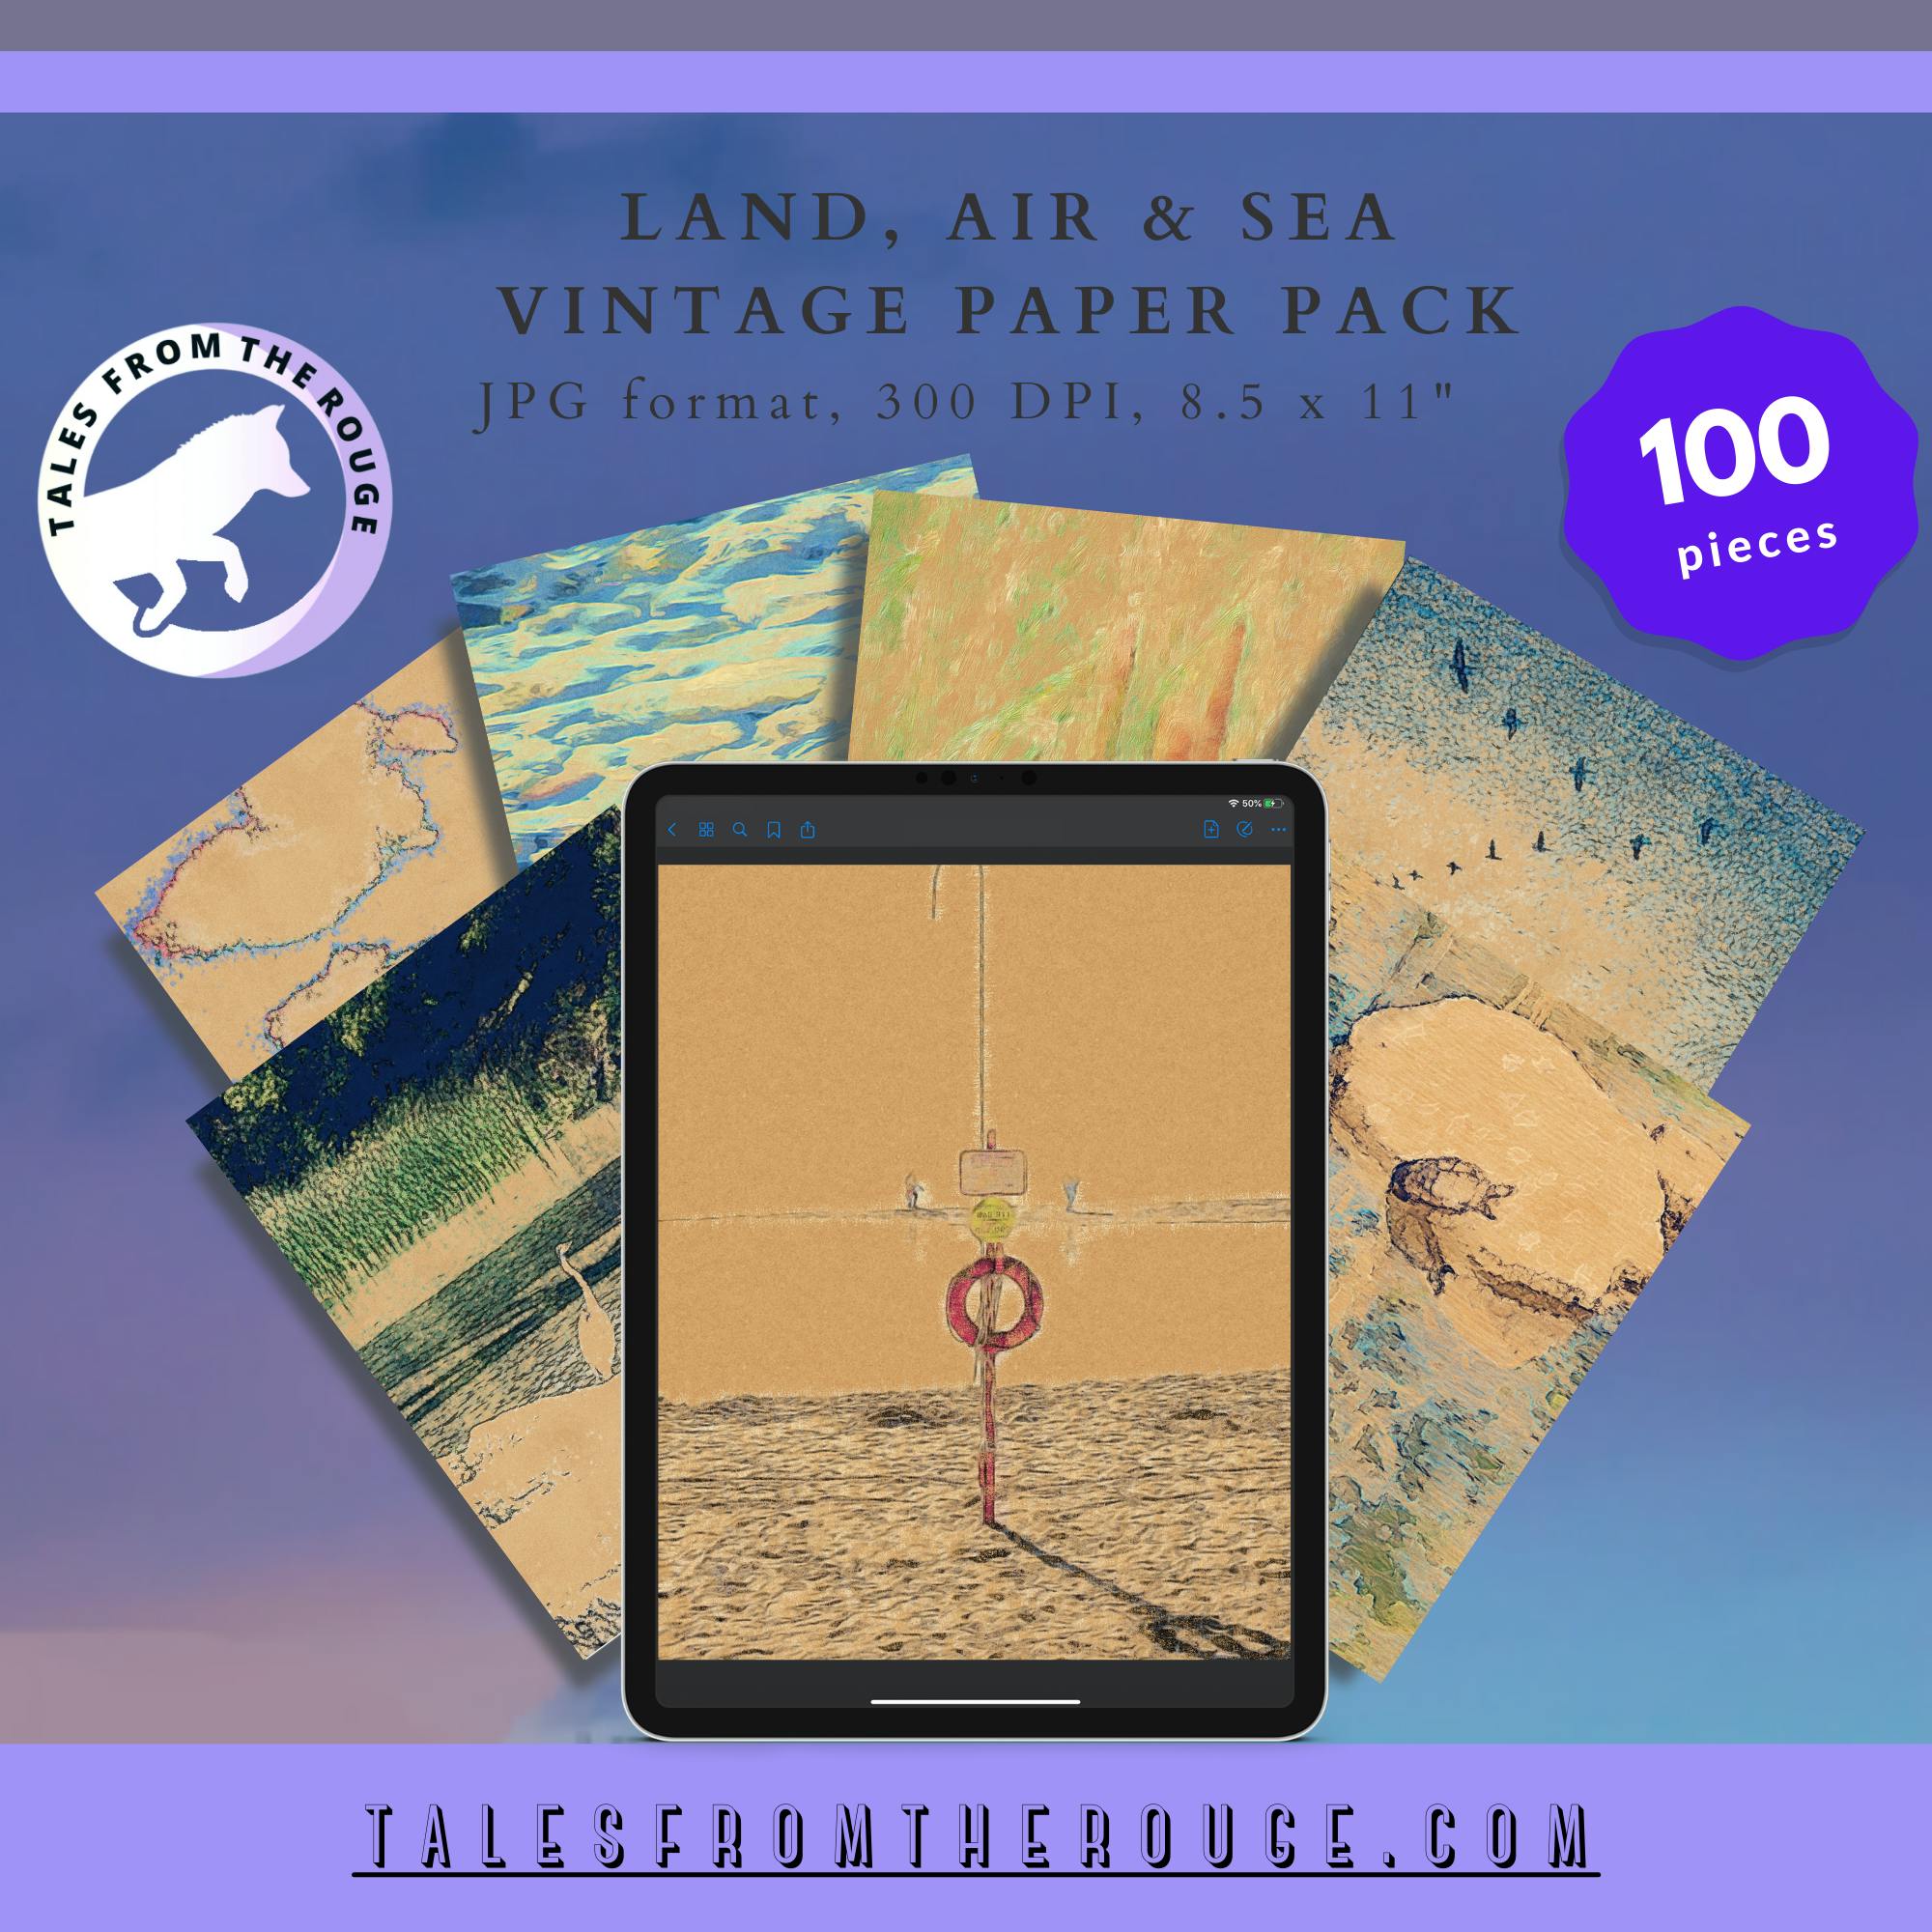 Land, Air & Sea Vintage Papers - 100 sheets